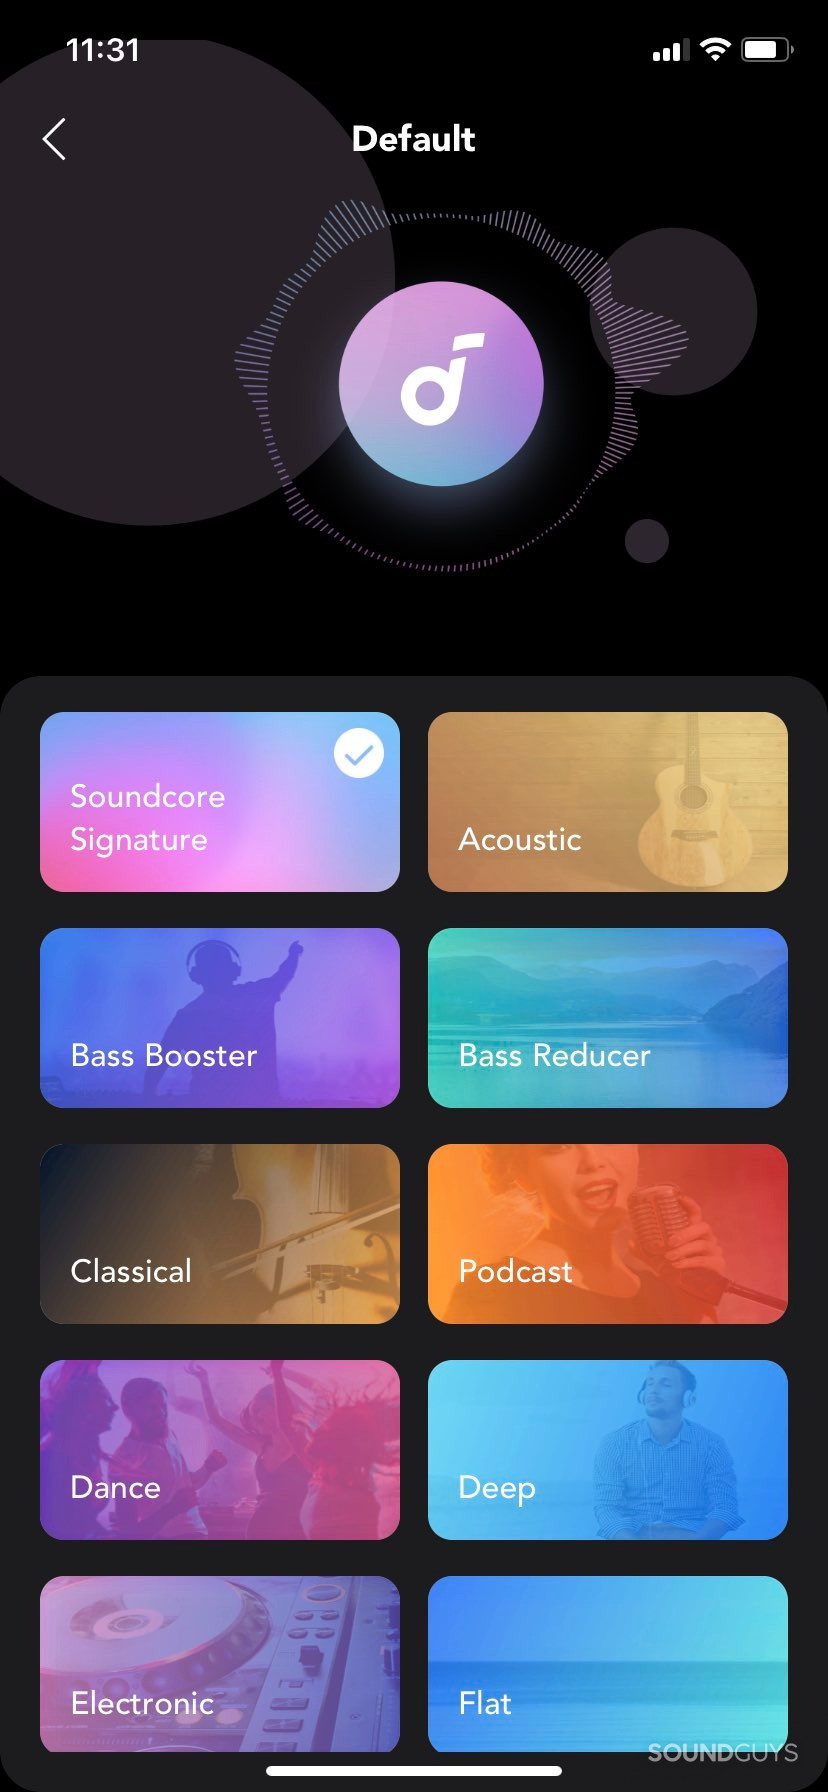 A few of the EQ selections in the Soundcore app.